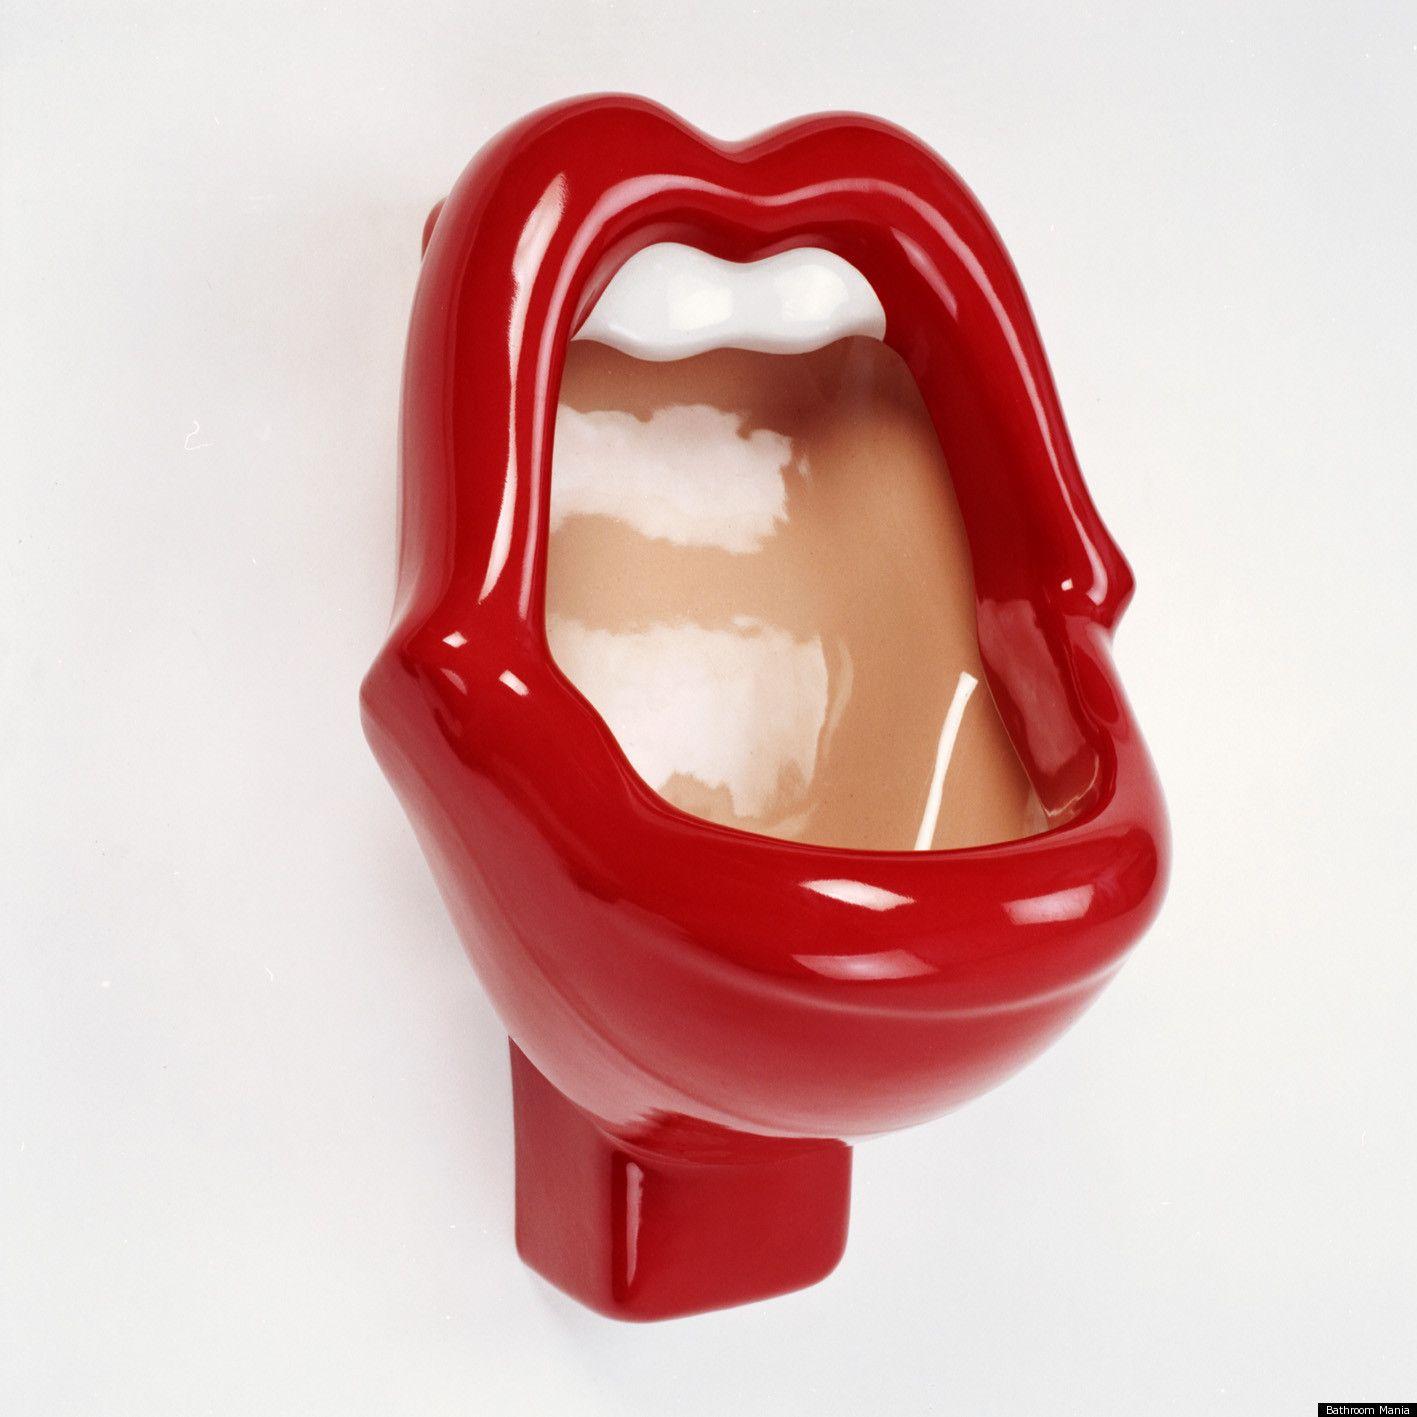 Red Lip and Toungue Logo - Rolling Stone Mouth-Shaped Urinals Called Sexist (PHOTOS) | HuffPost